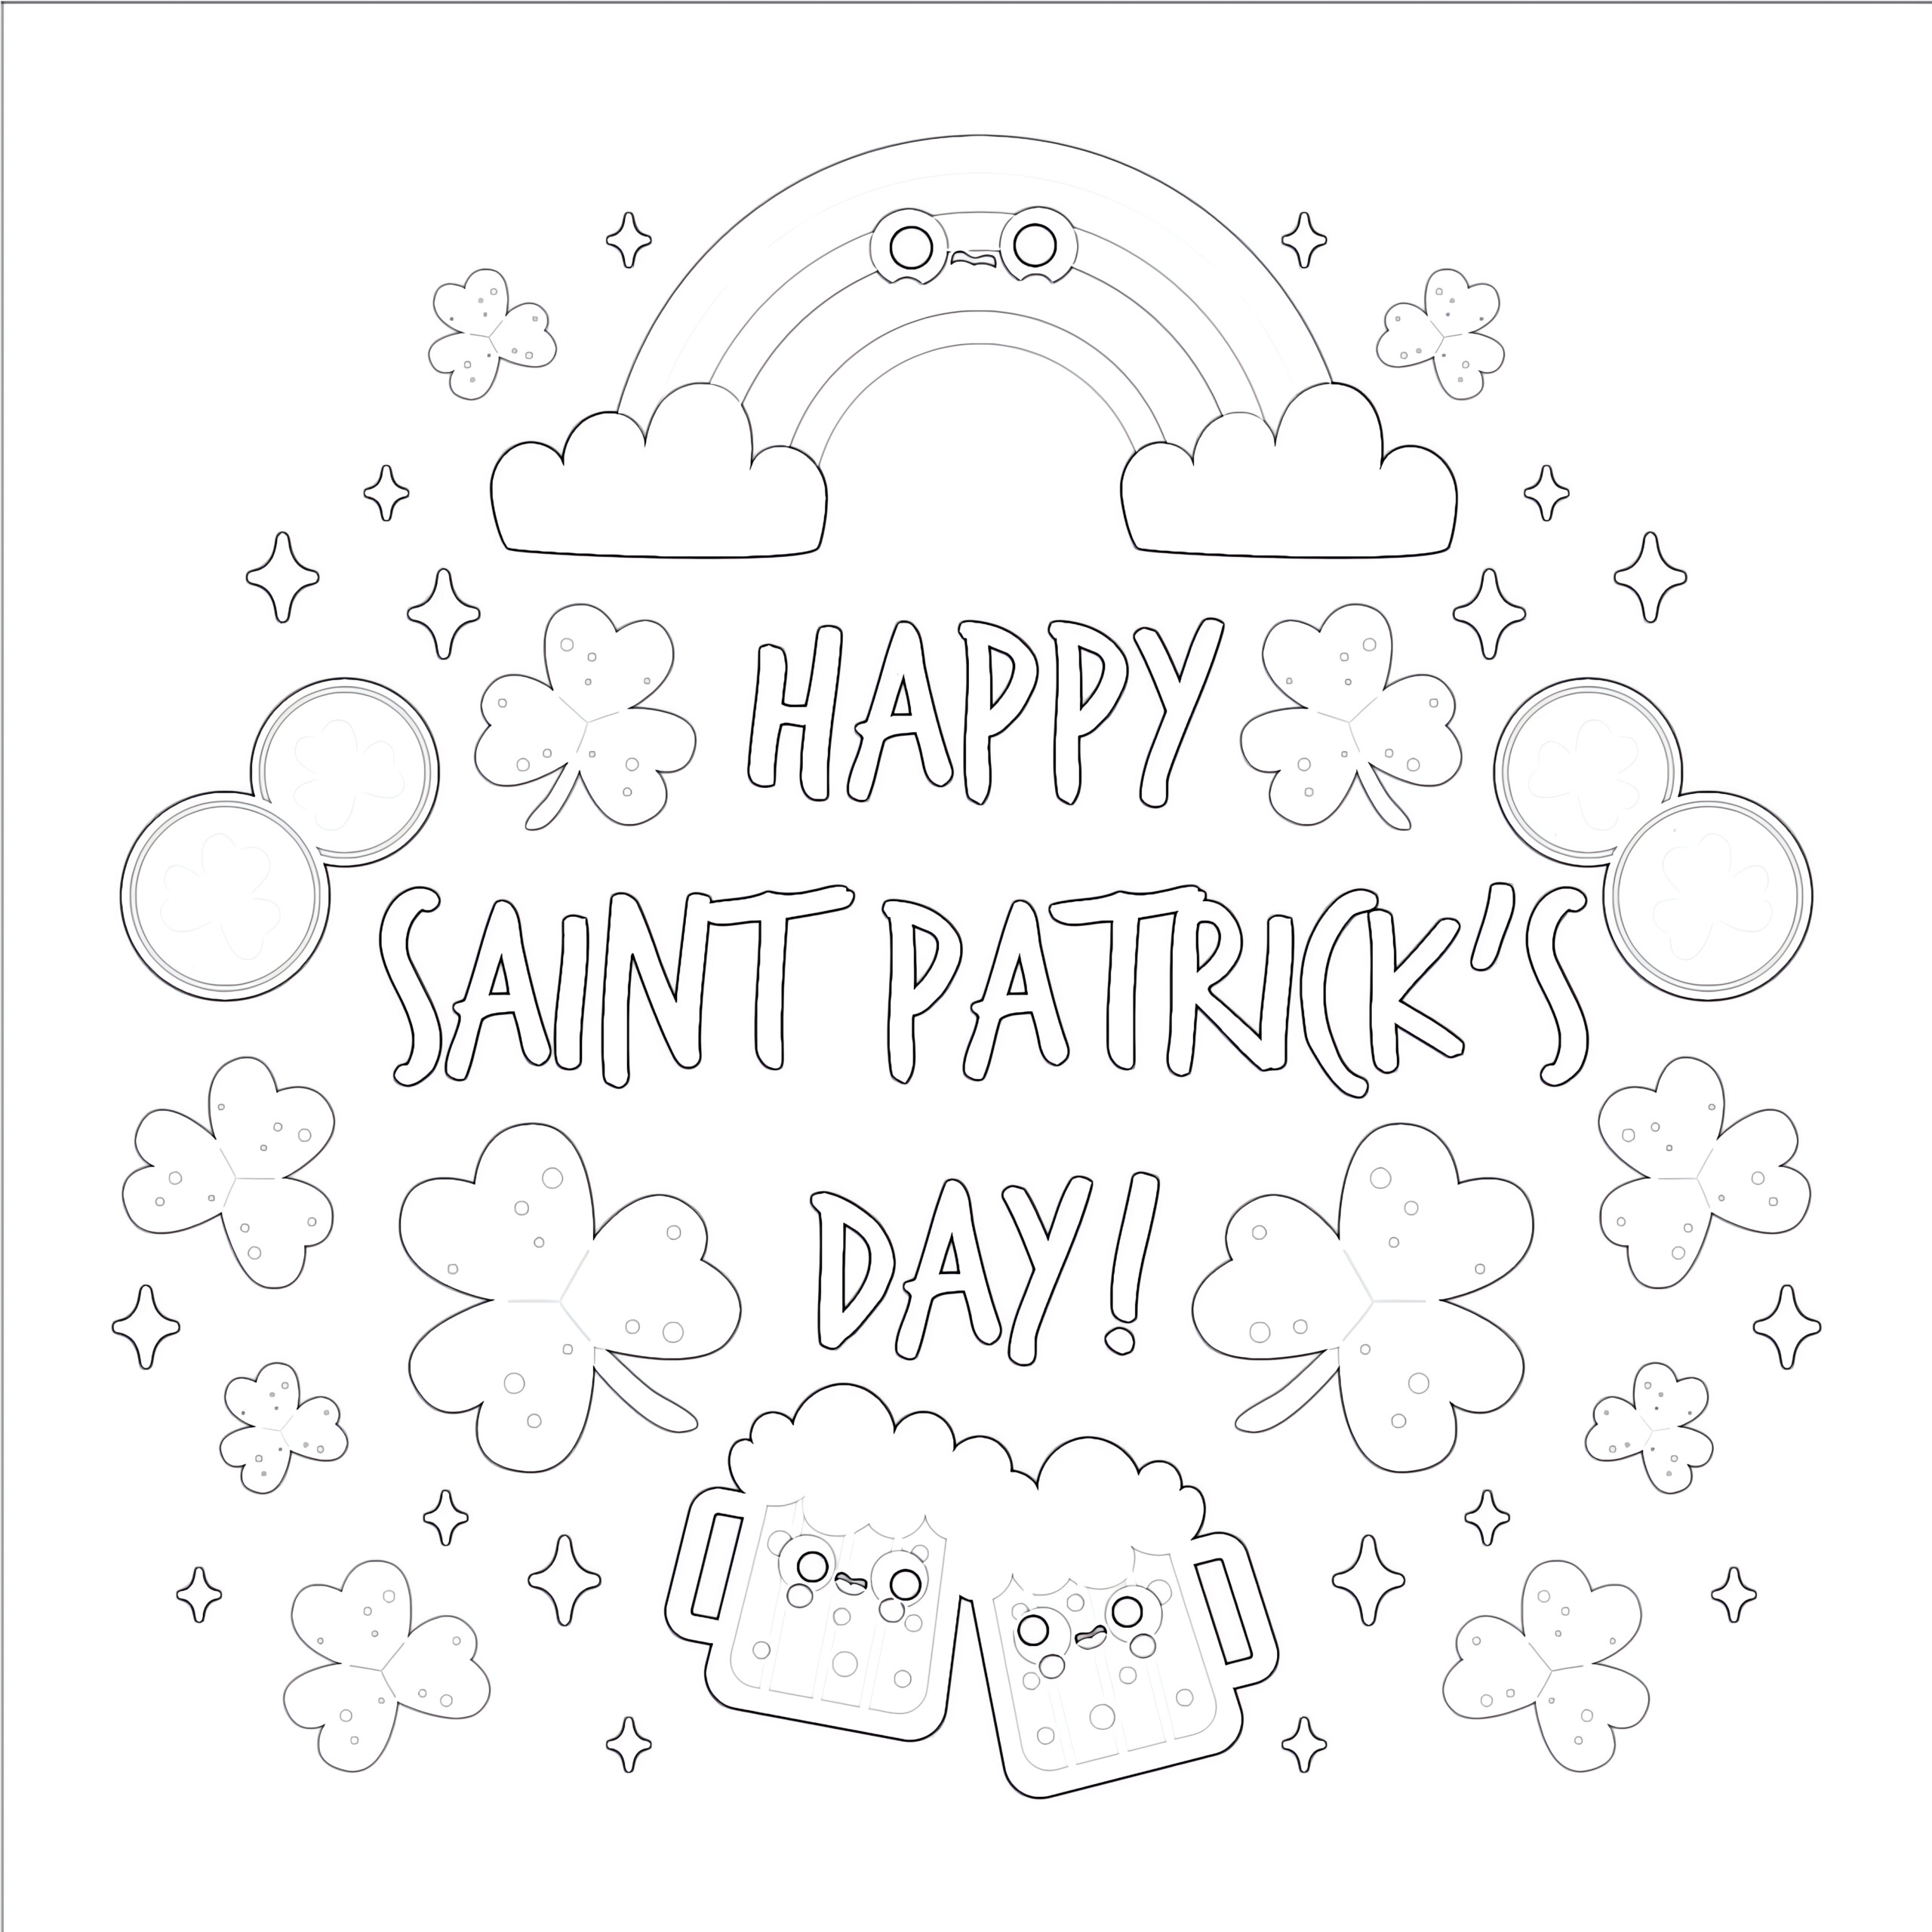 Happy Saint Patrick’s Day - Coloring page